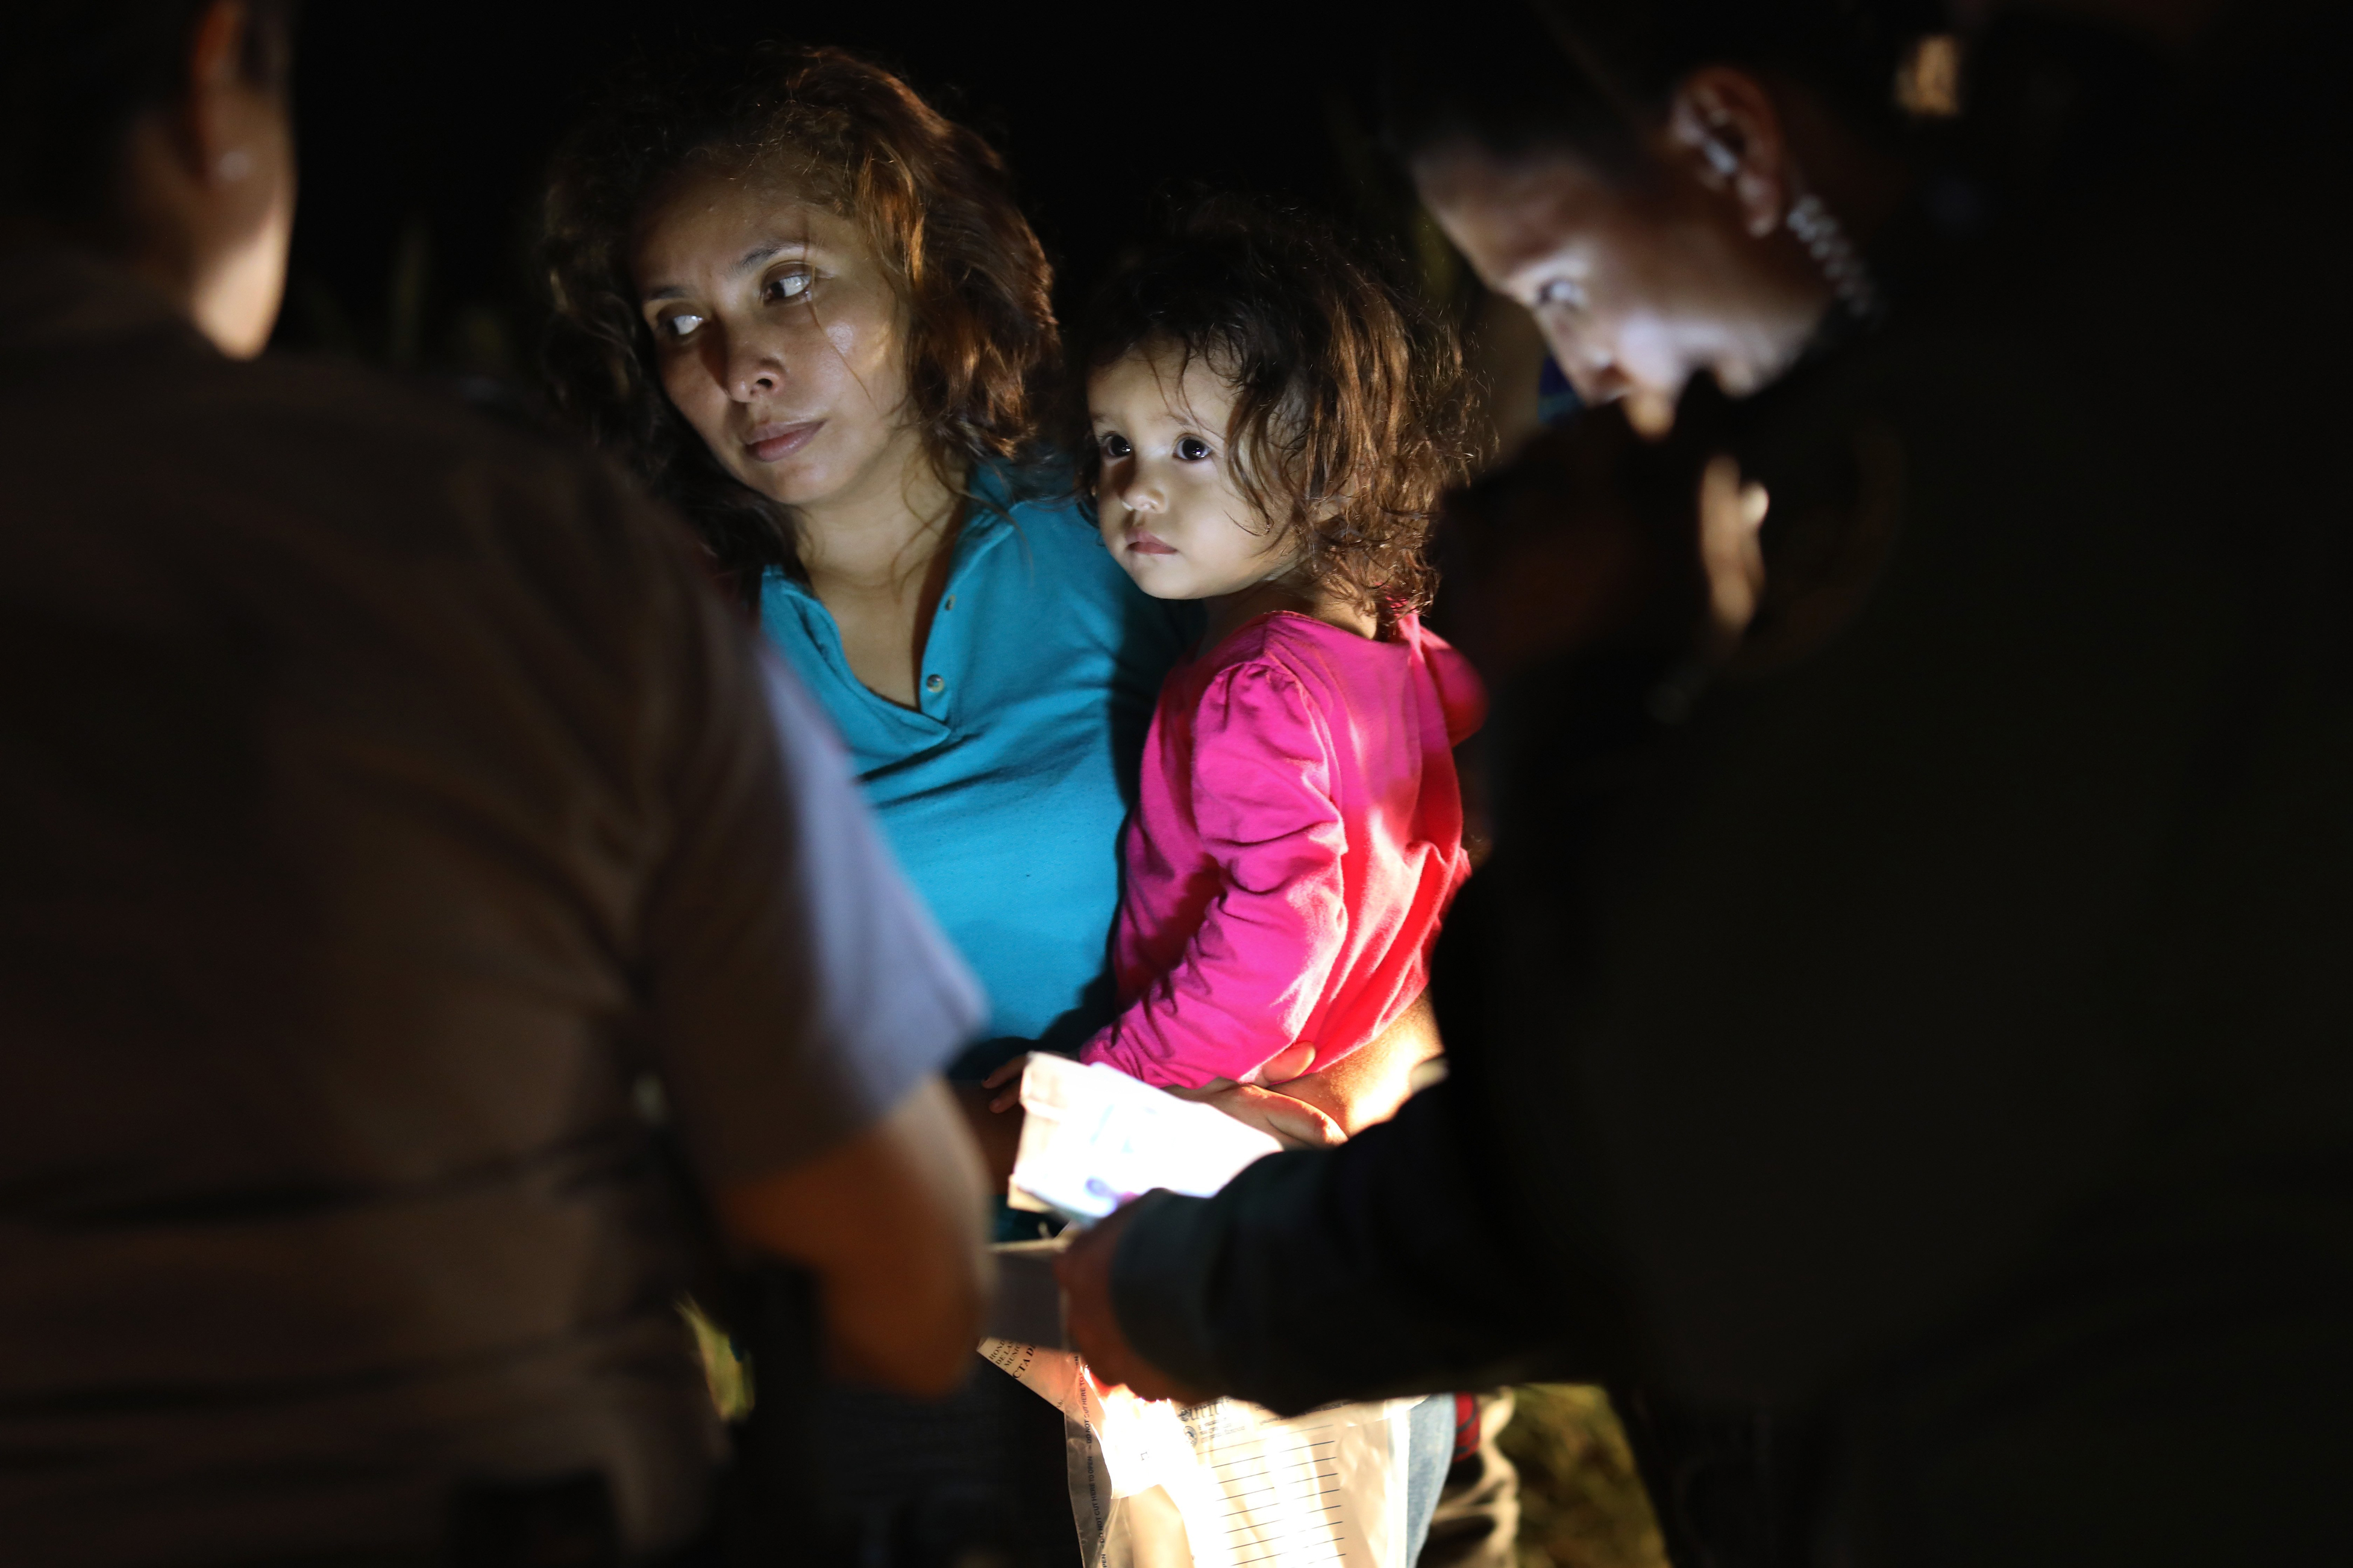 A Honduran mother holds her two-year-old as U.S. Border Patrol as agents review their papers near the U.S.-Mexico border in McAllen, Texas on June 12, 2018. The asylum seekers had rafted across the Rio Grande from Mexico and were detained by U.S. Border Patrol agents before being sent to a processing center for possible separation. (John Moore—Getty Images)